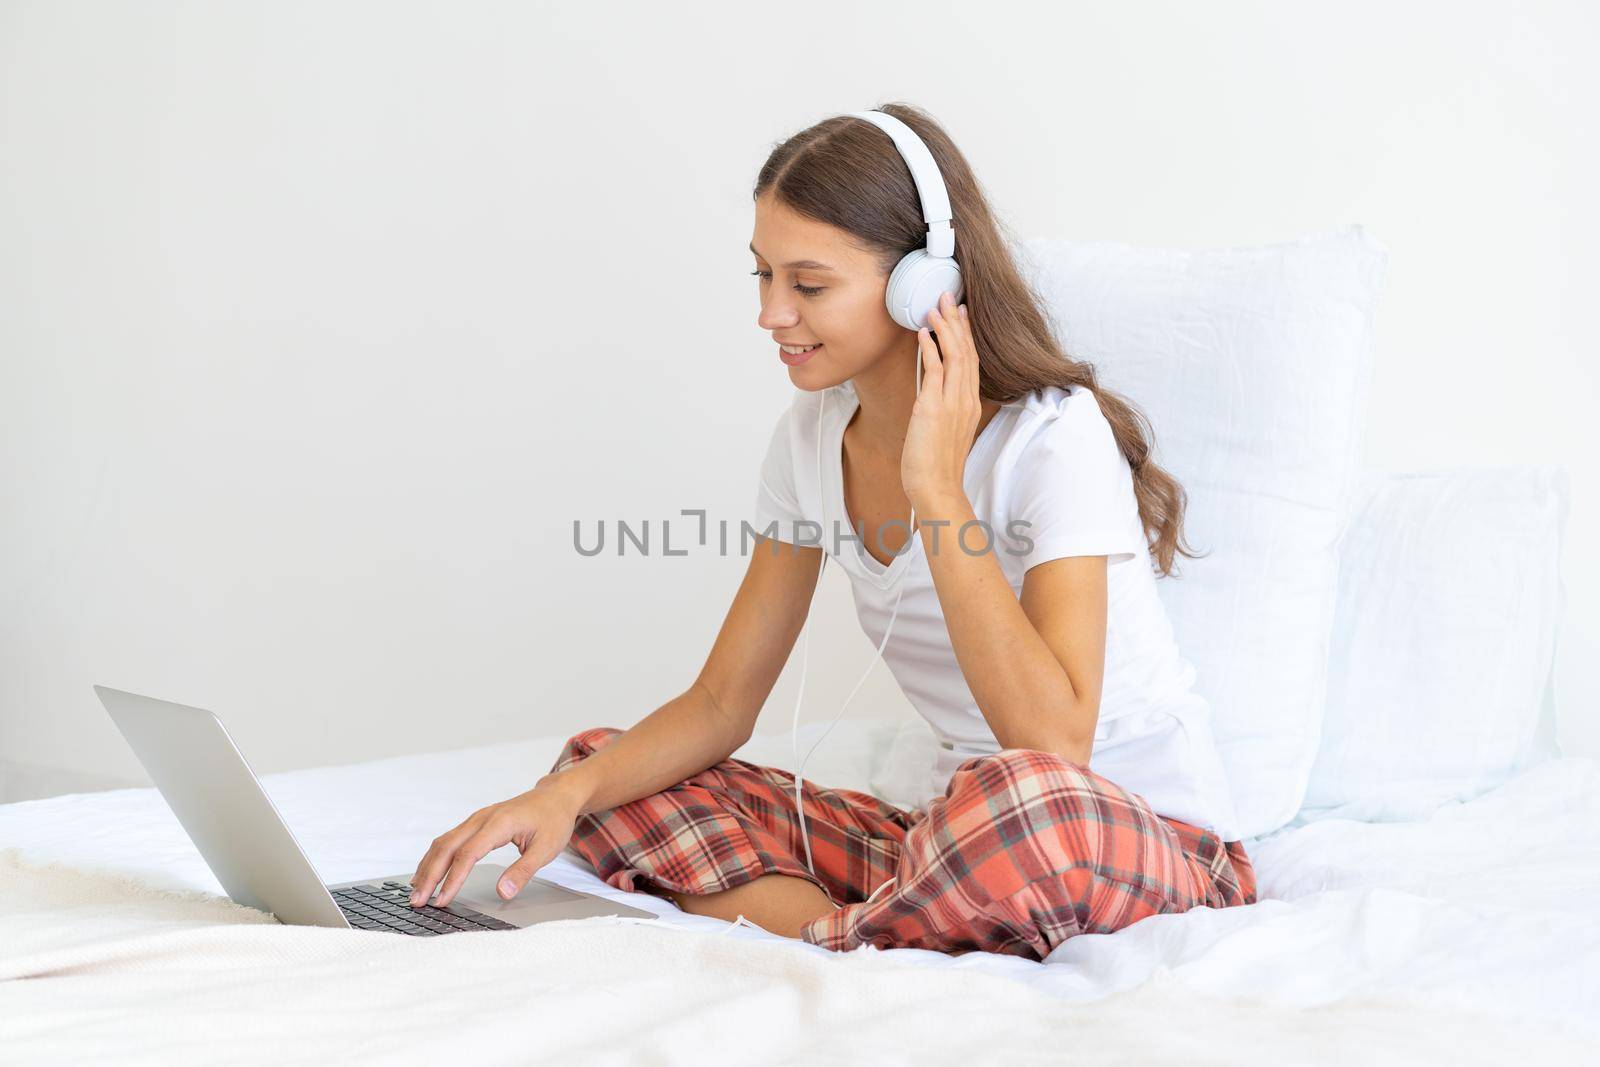 Young female in headphones studying online, working from home using laptop, hotel interior, copy space. Gig economy, digital nomad,